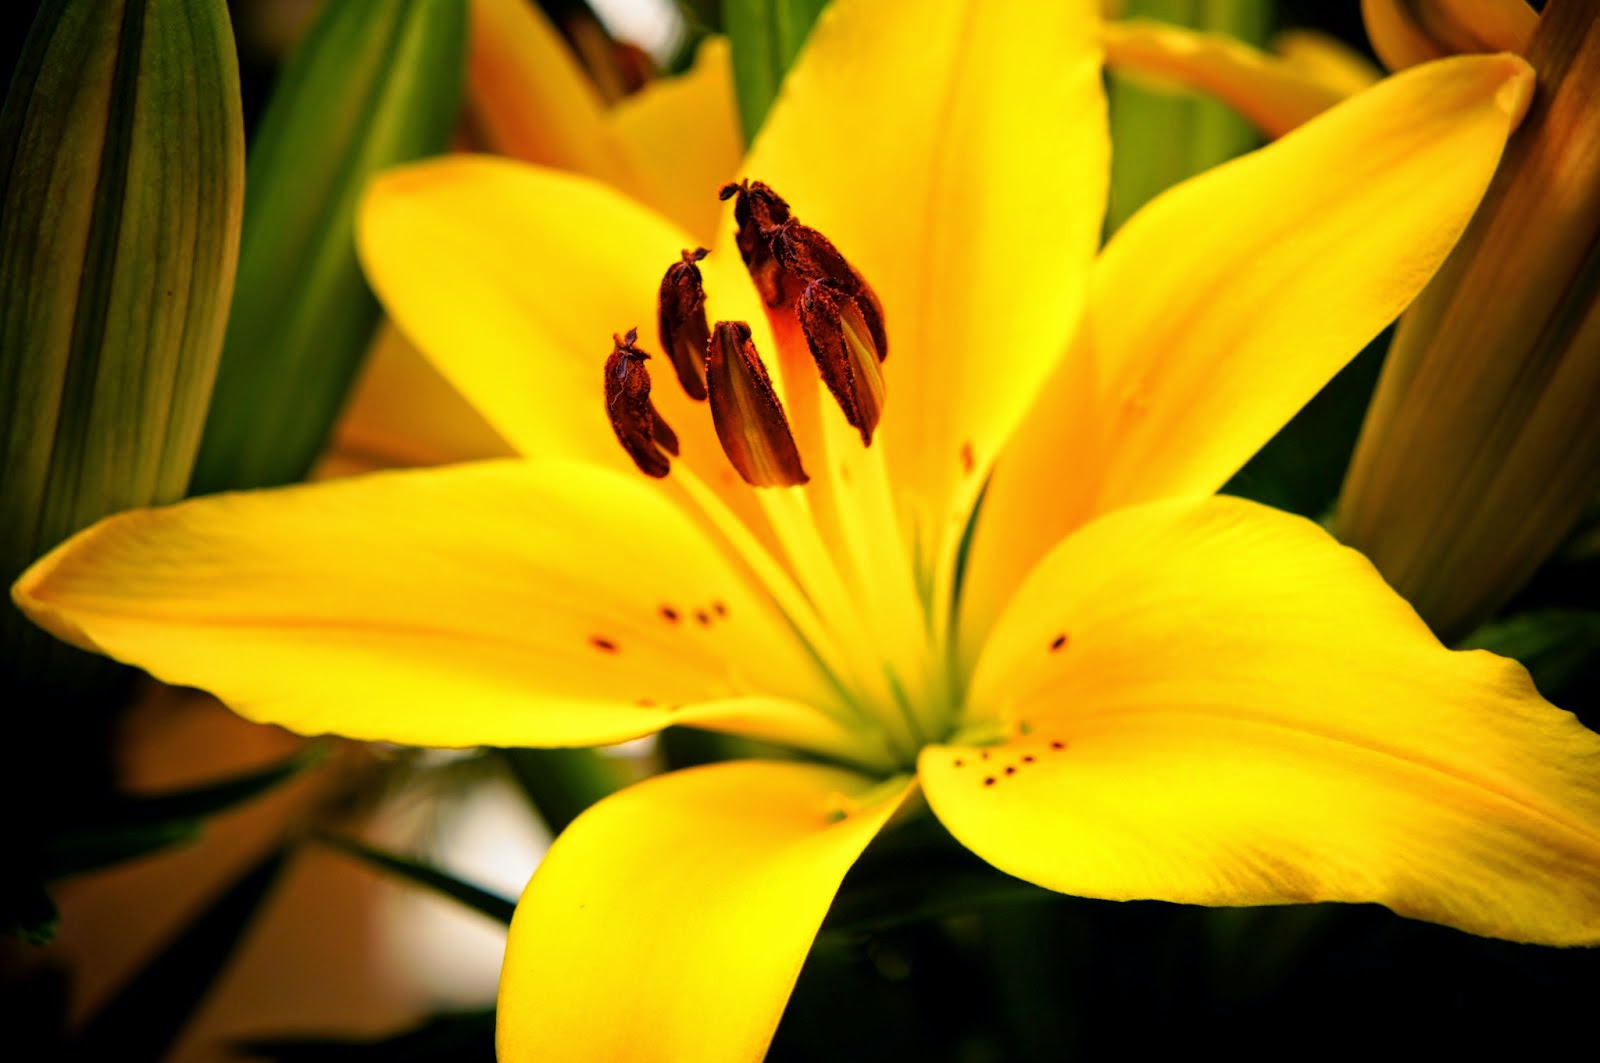 unedited public domain picture of a beautiful yellow flower